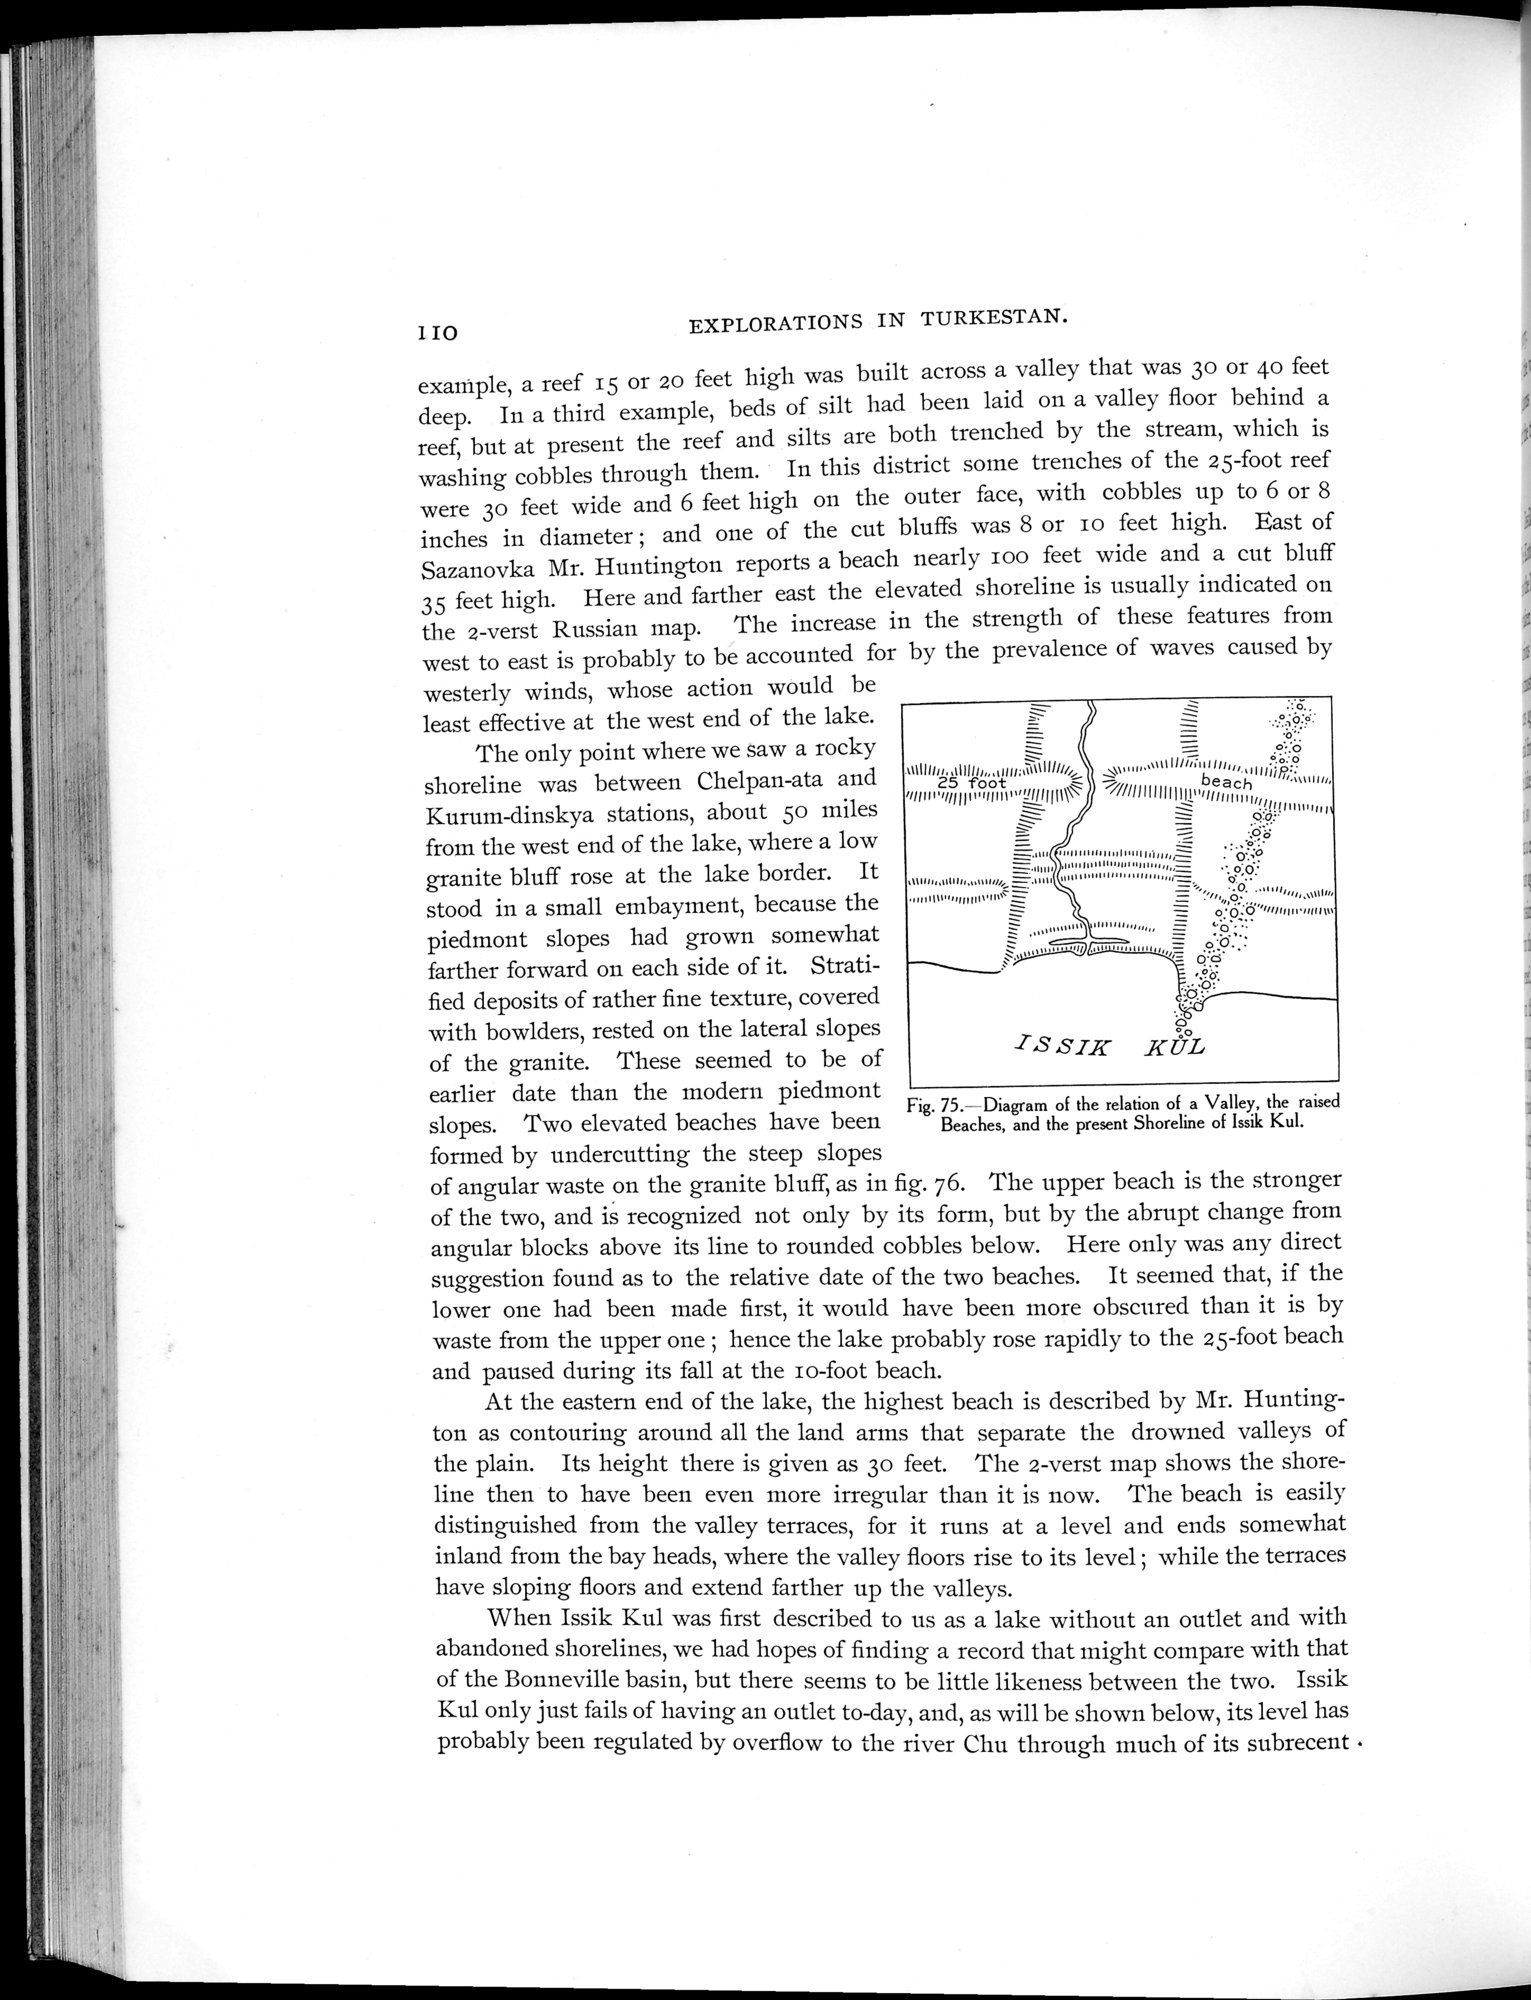 Explorations in Turkestan 1903 : vol.1 / Page 134 (Grayscale High Resolution Image)